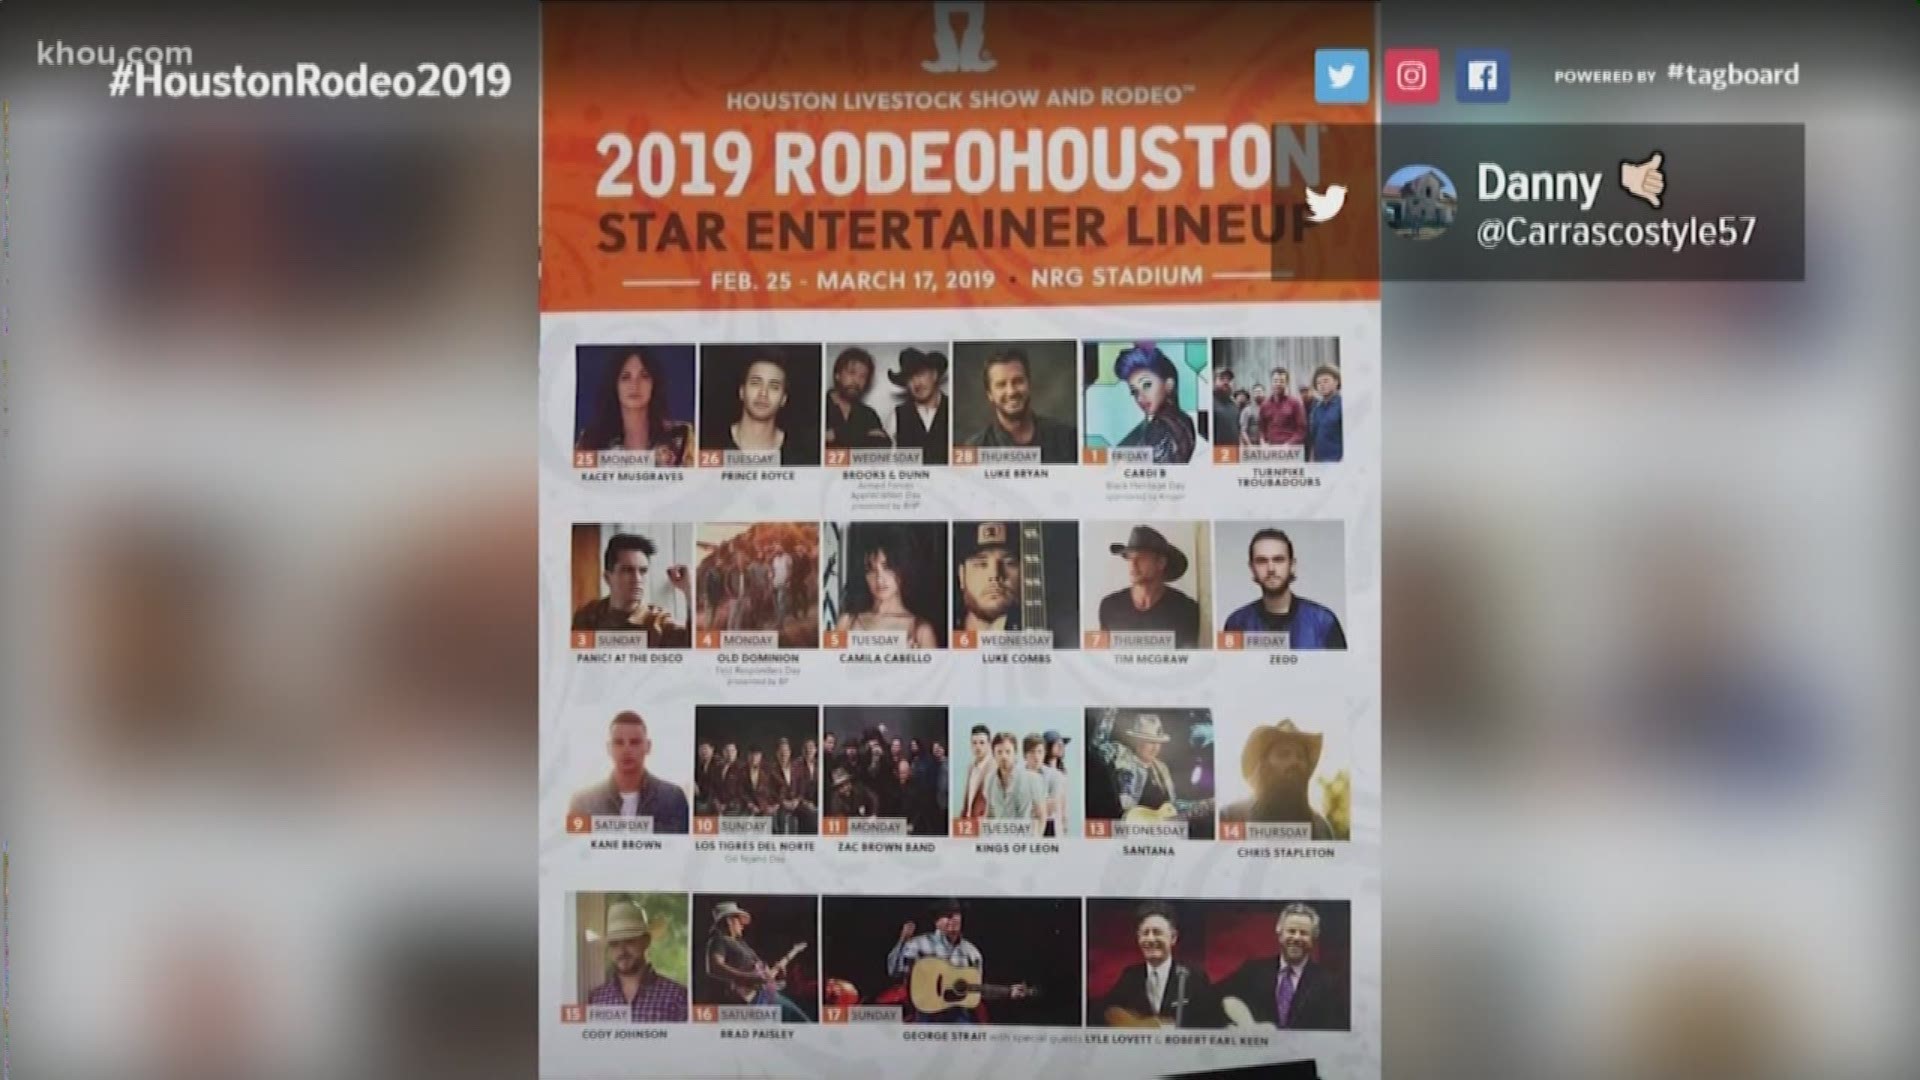 The 2019 rodeo concert lineup was leaked Thursday -- we think. So KHOU 11 News wanted to verify: is it the real rodeo lineup?